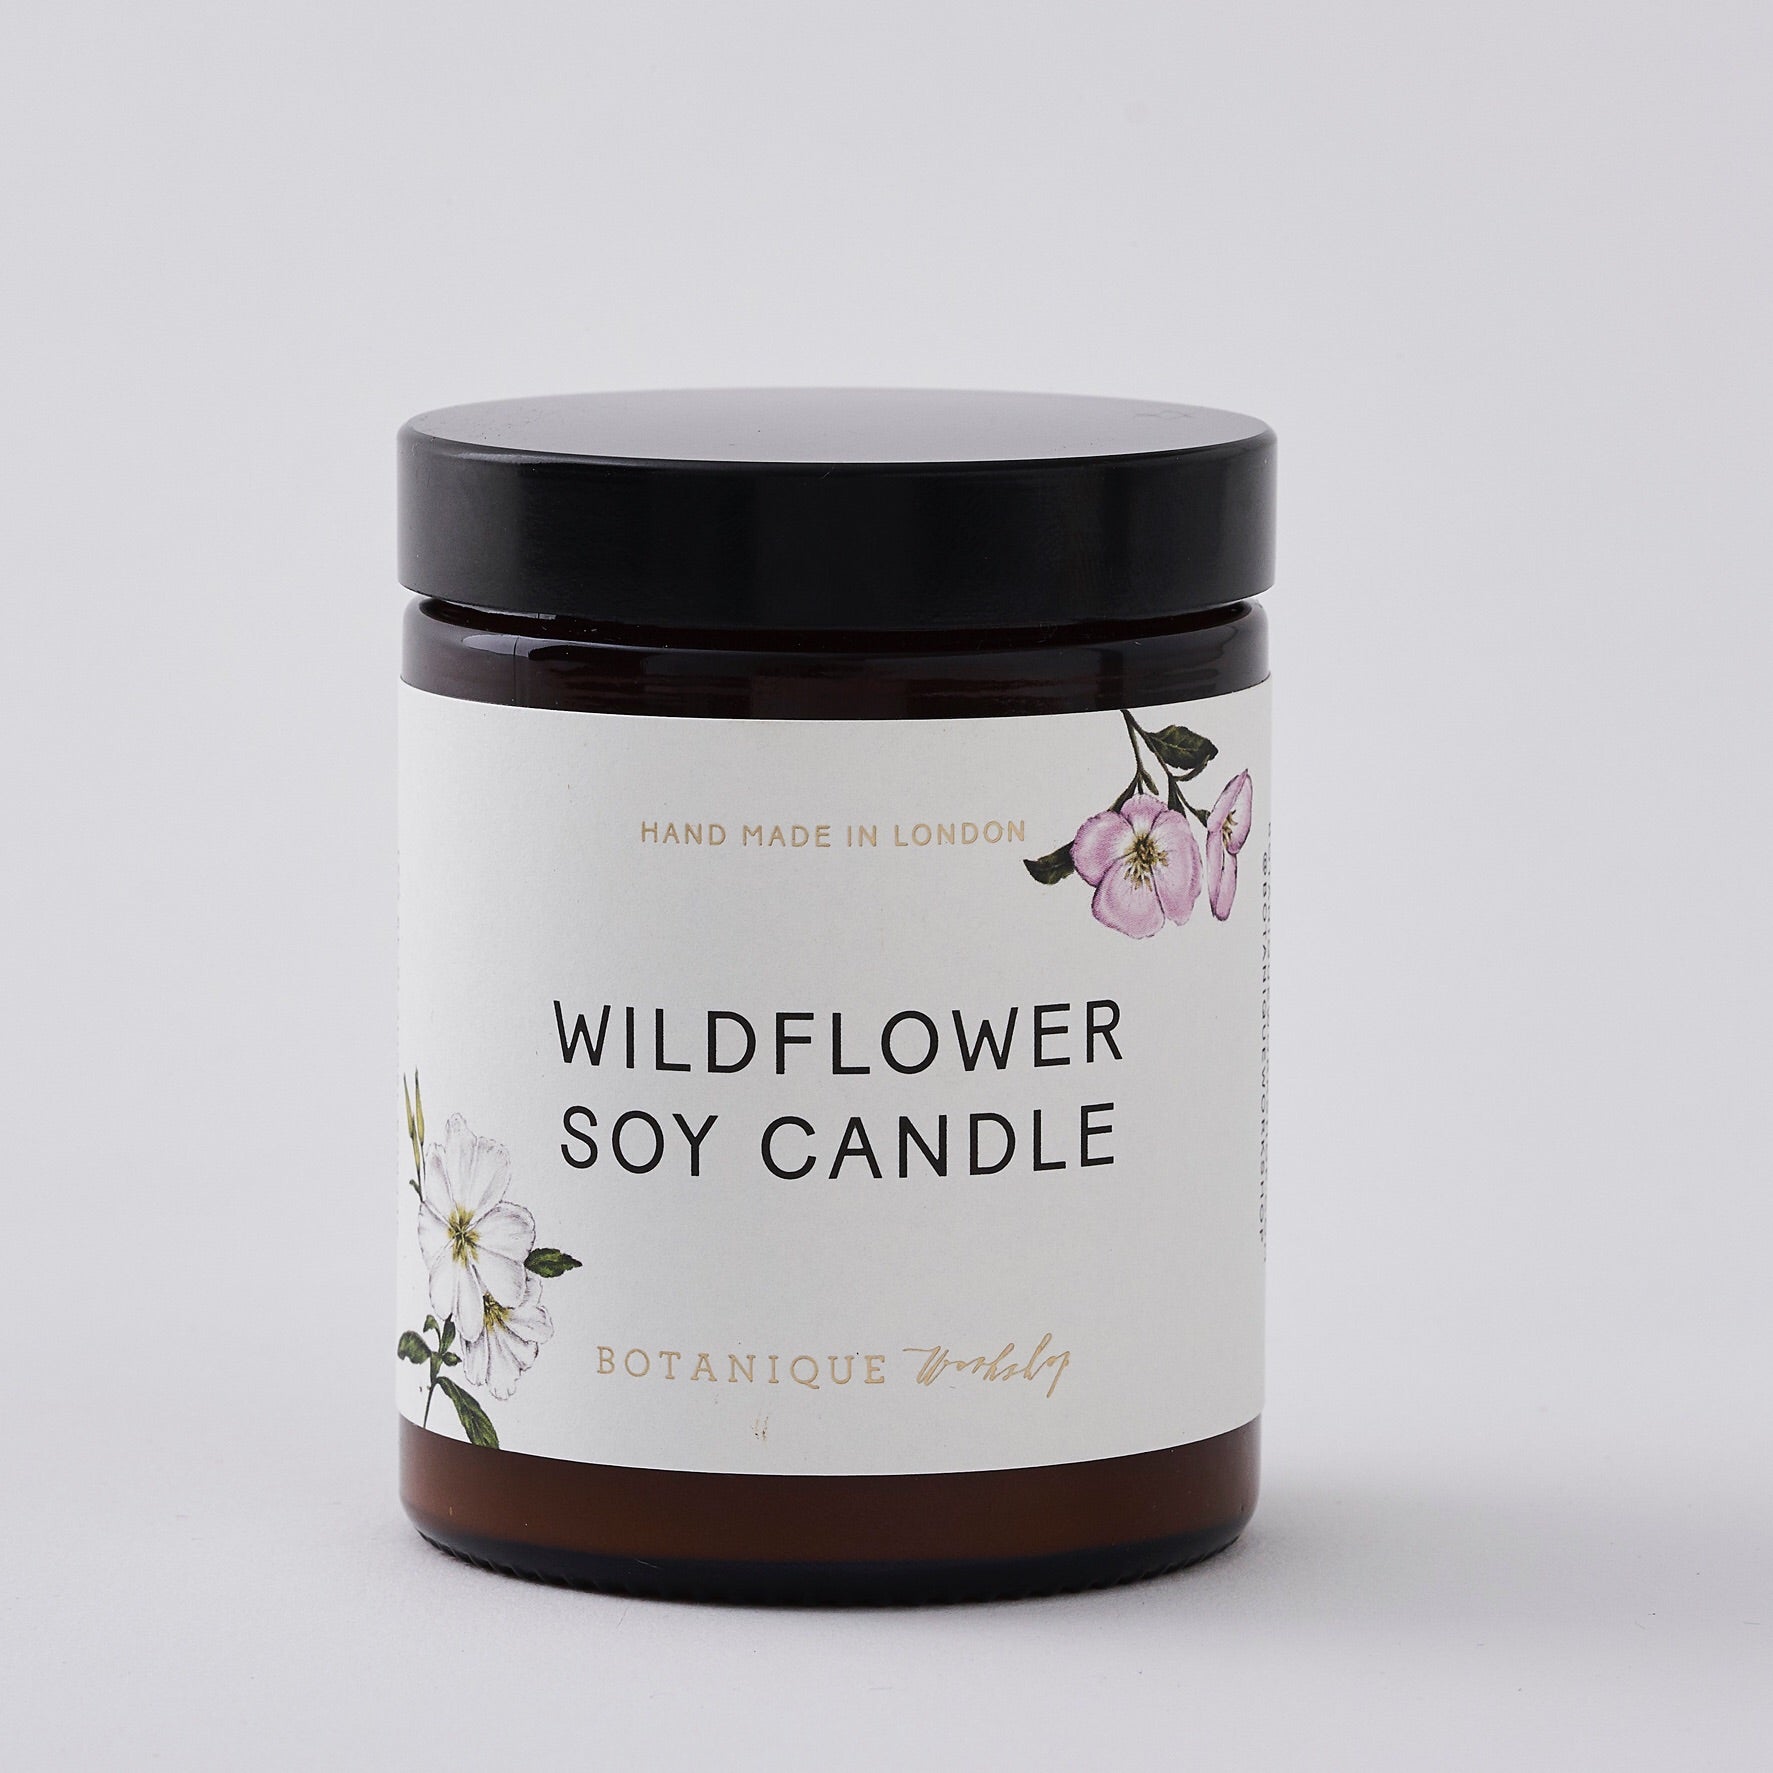 Hand-poured Wildflower scented Soy Candles